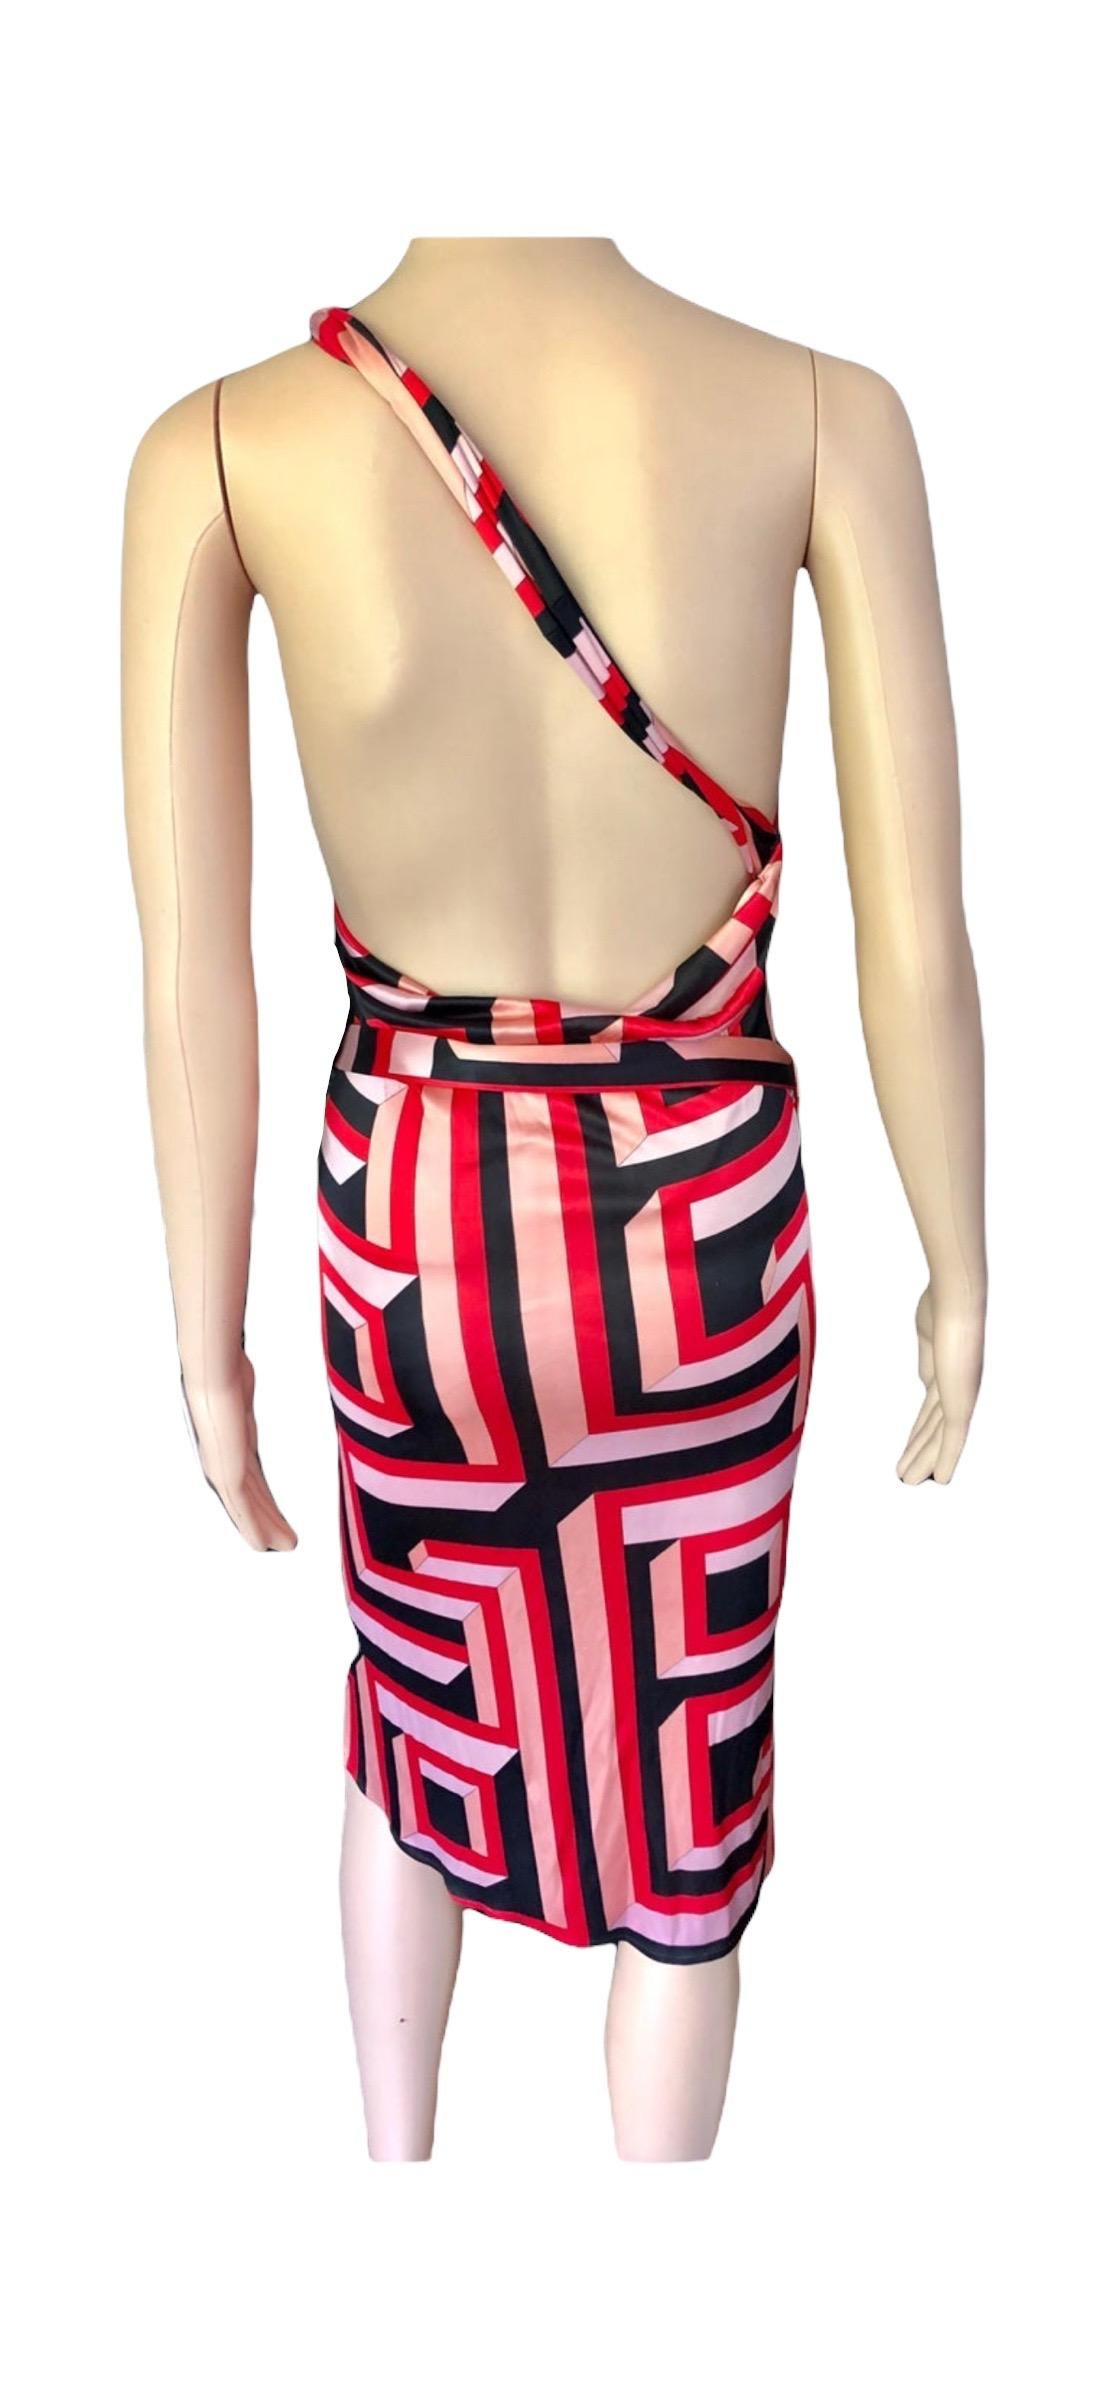 Gianni Versace S/S 2001 Vintage Geometric Print Belted Open Back Dress For Sale 4